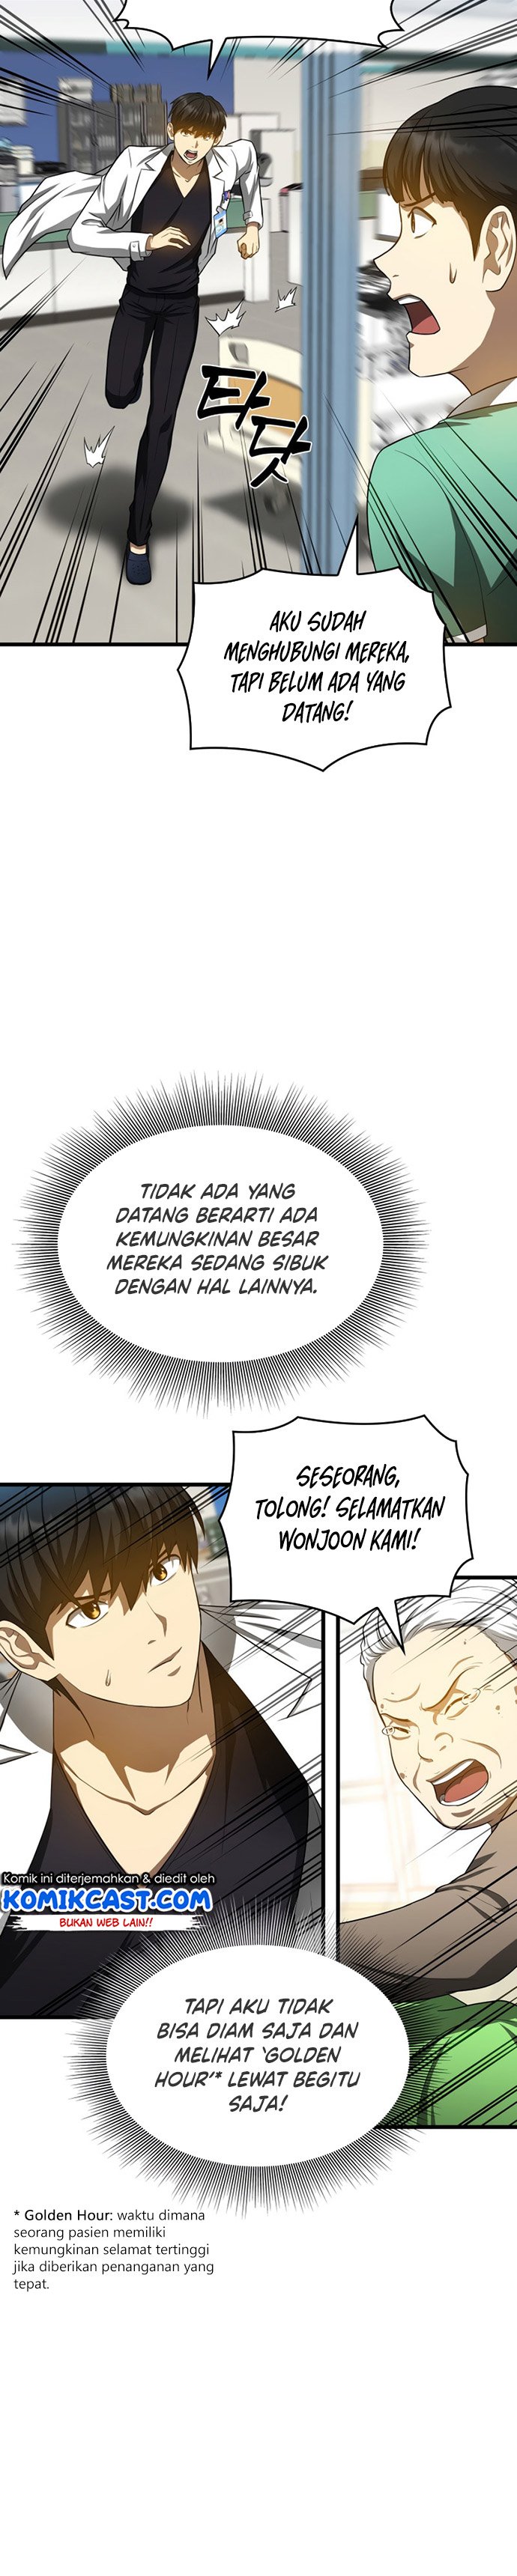 Perfect Surgeon Chapter 25 7